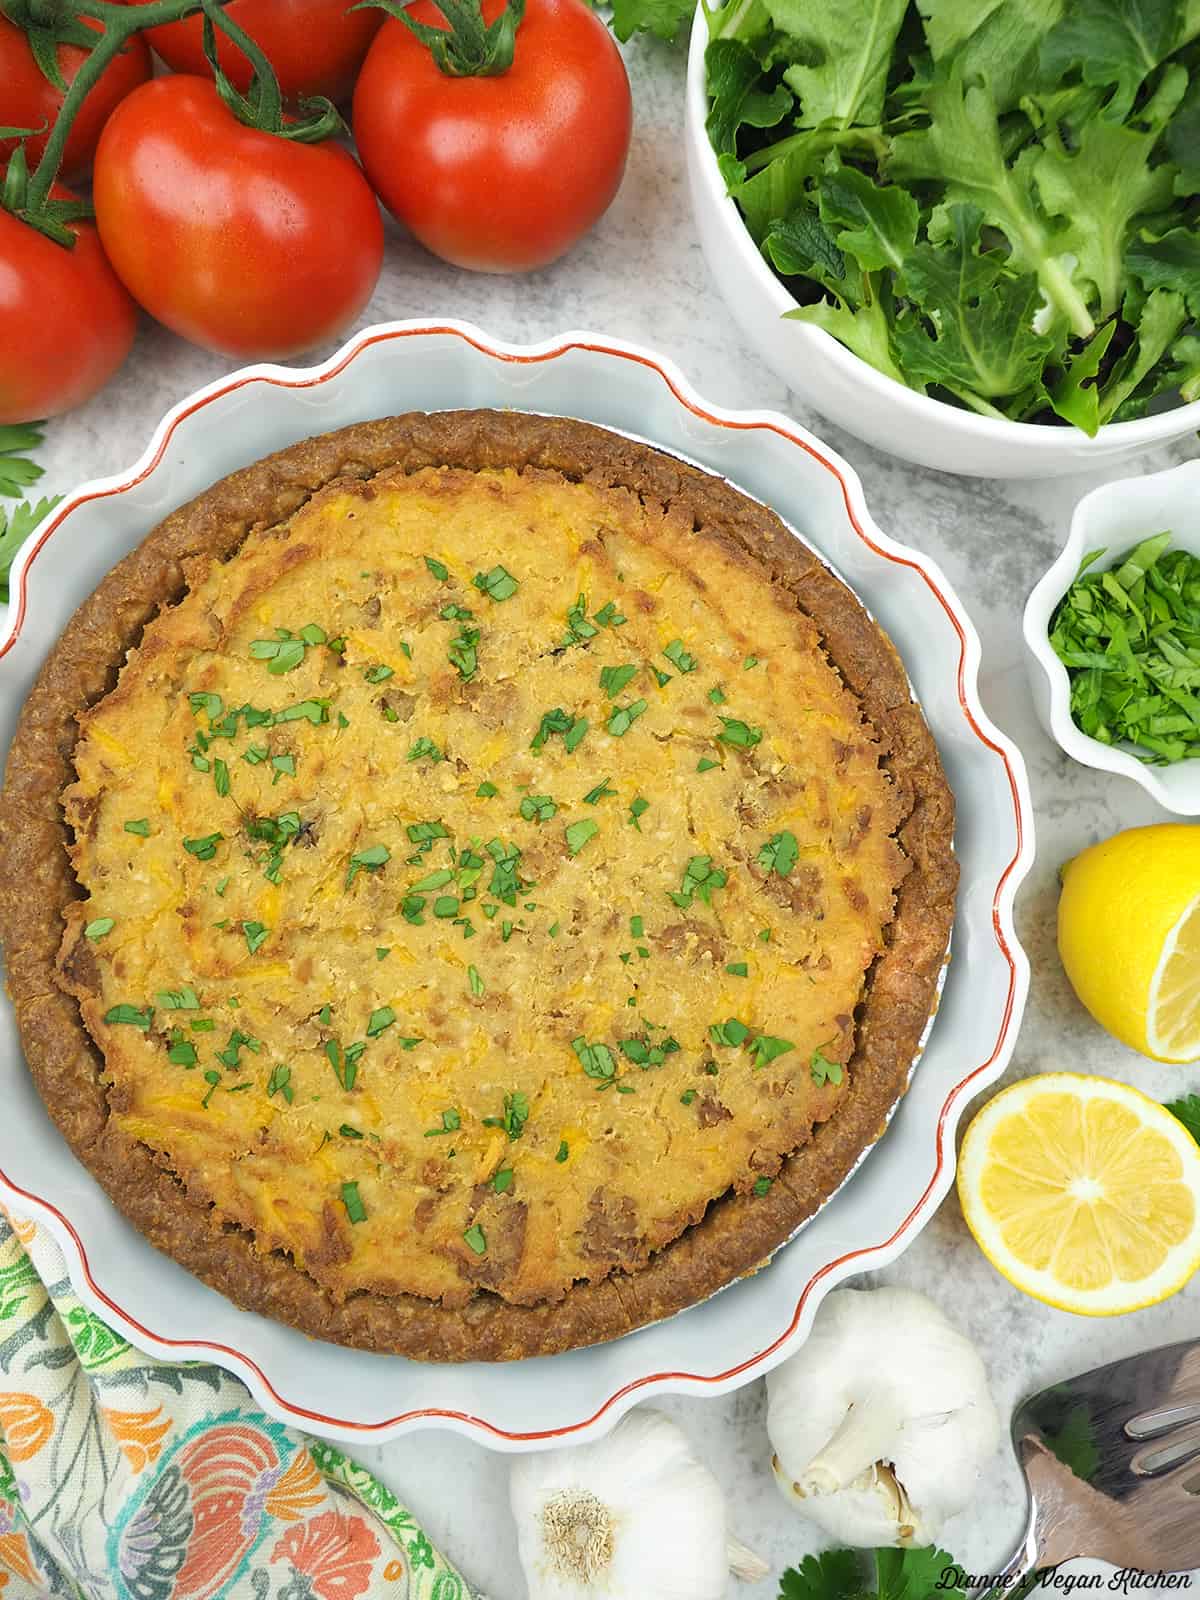 Vegan Quiche Lorraine with tomatoes, salad, lemons, garlic, and parsley